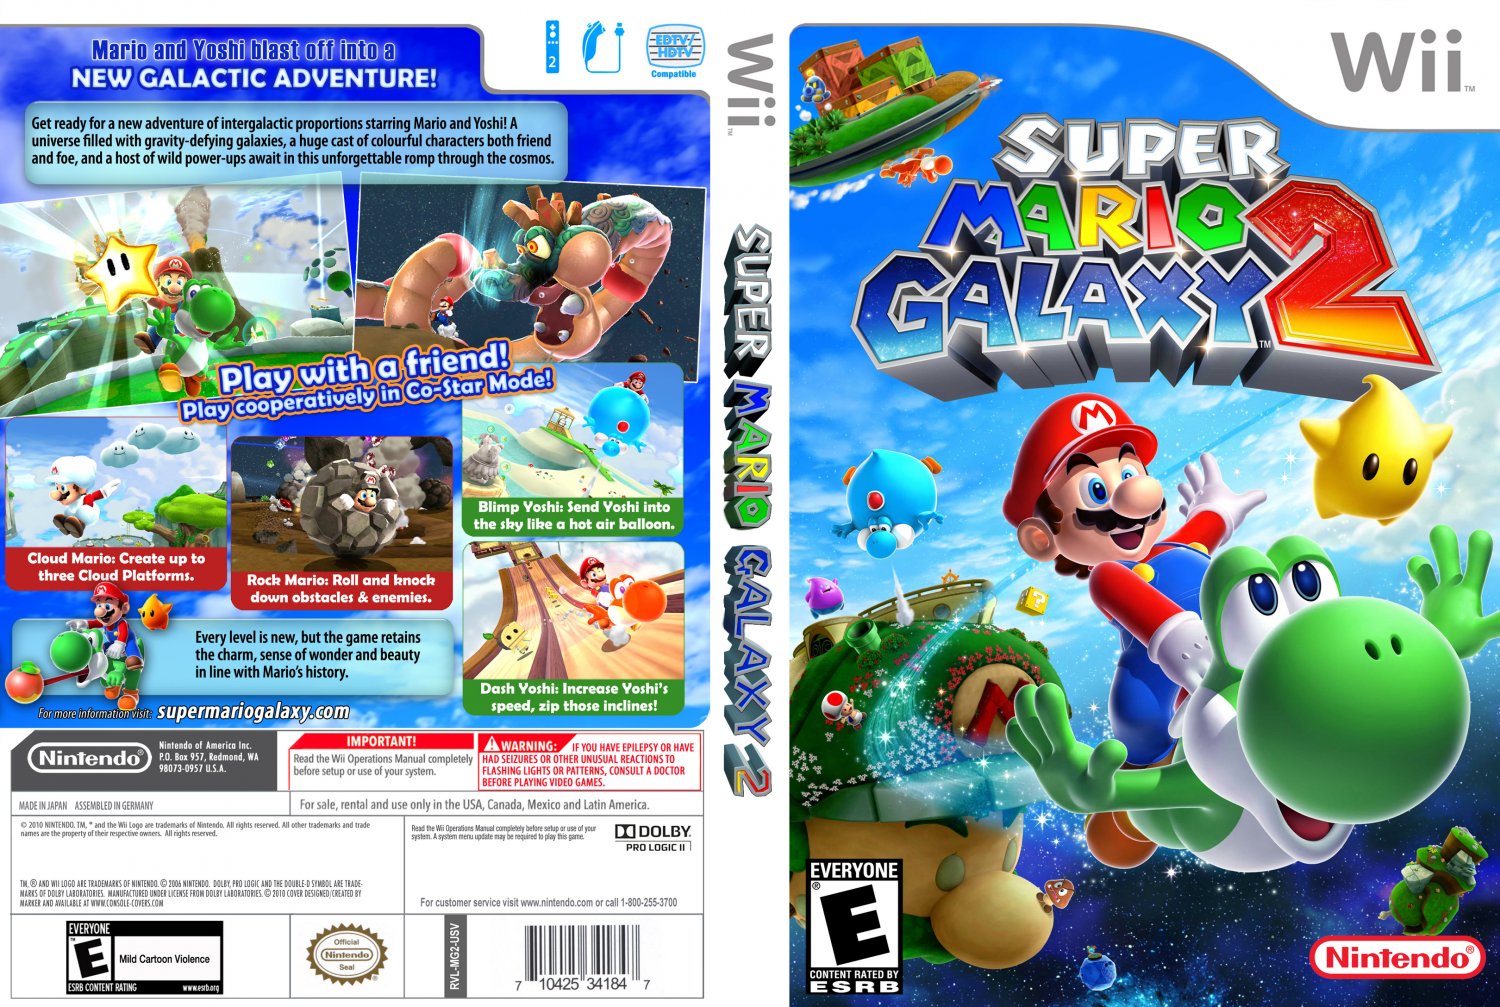 Super Mario Galaxy Wii Download Wii Game iSO Torrent